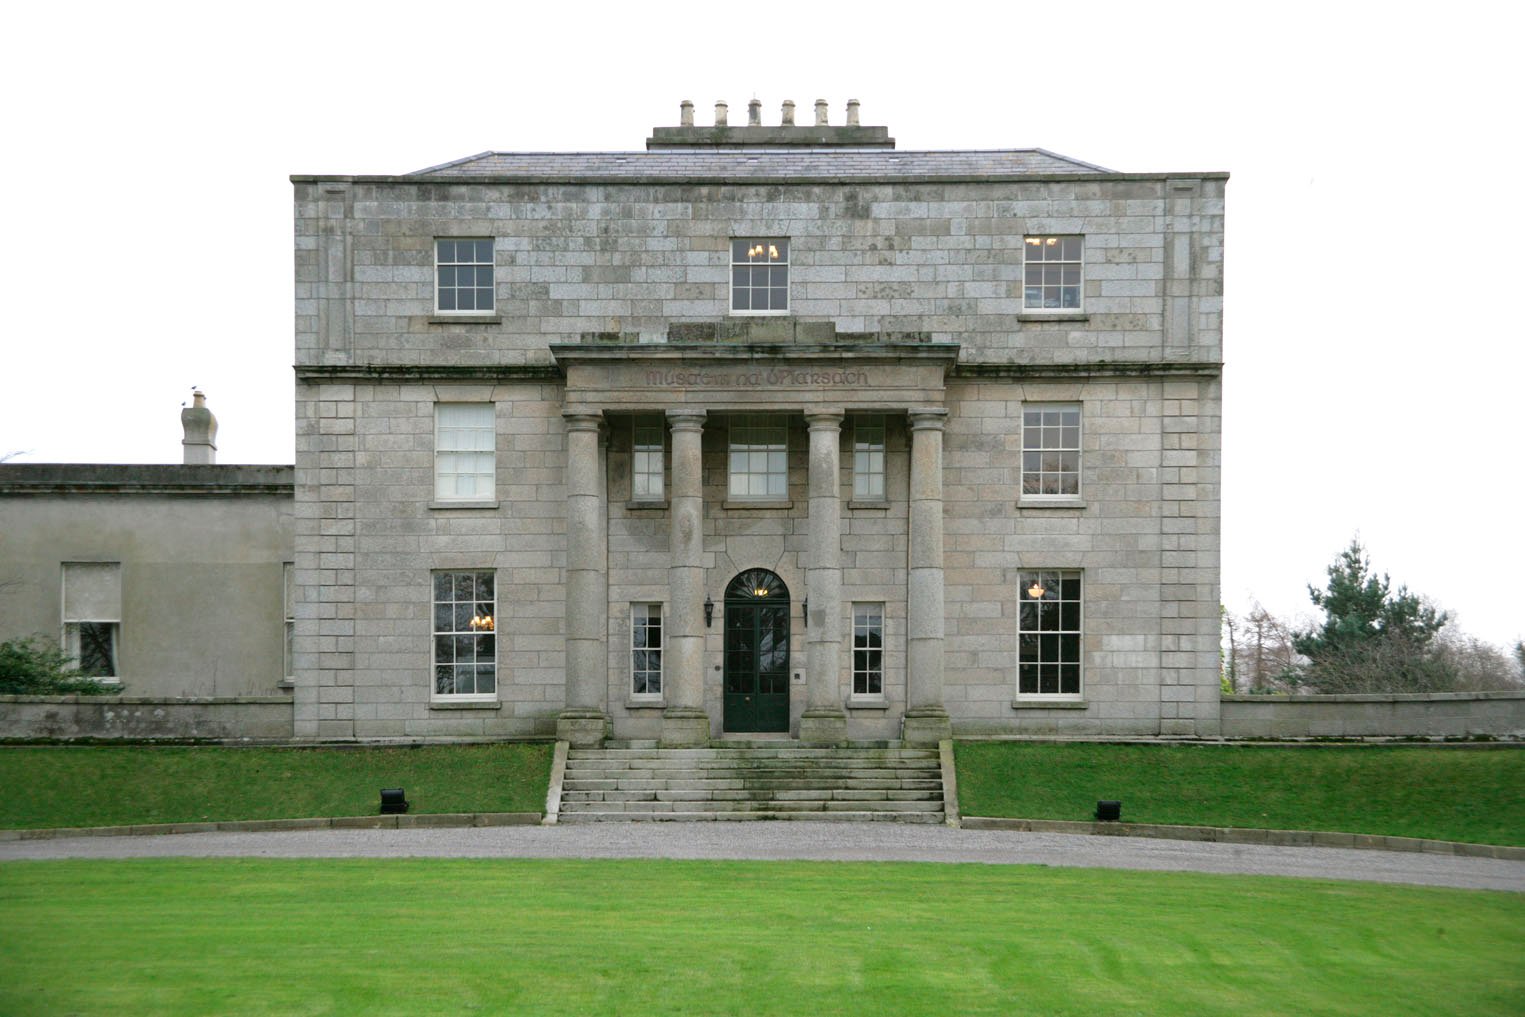 The Pearse Museum and St Enda’s Park was where Patrick Pearse lived and ran his innovative Irish-speaking school, Scoil Éanna, between 1910-16.